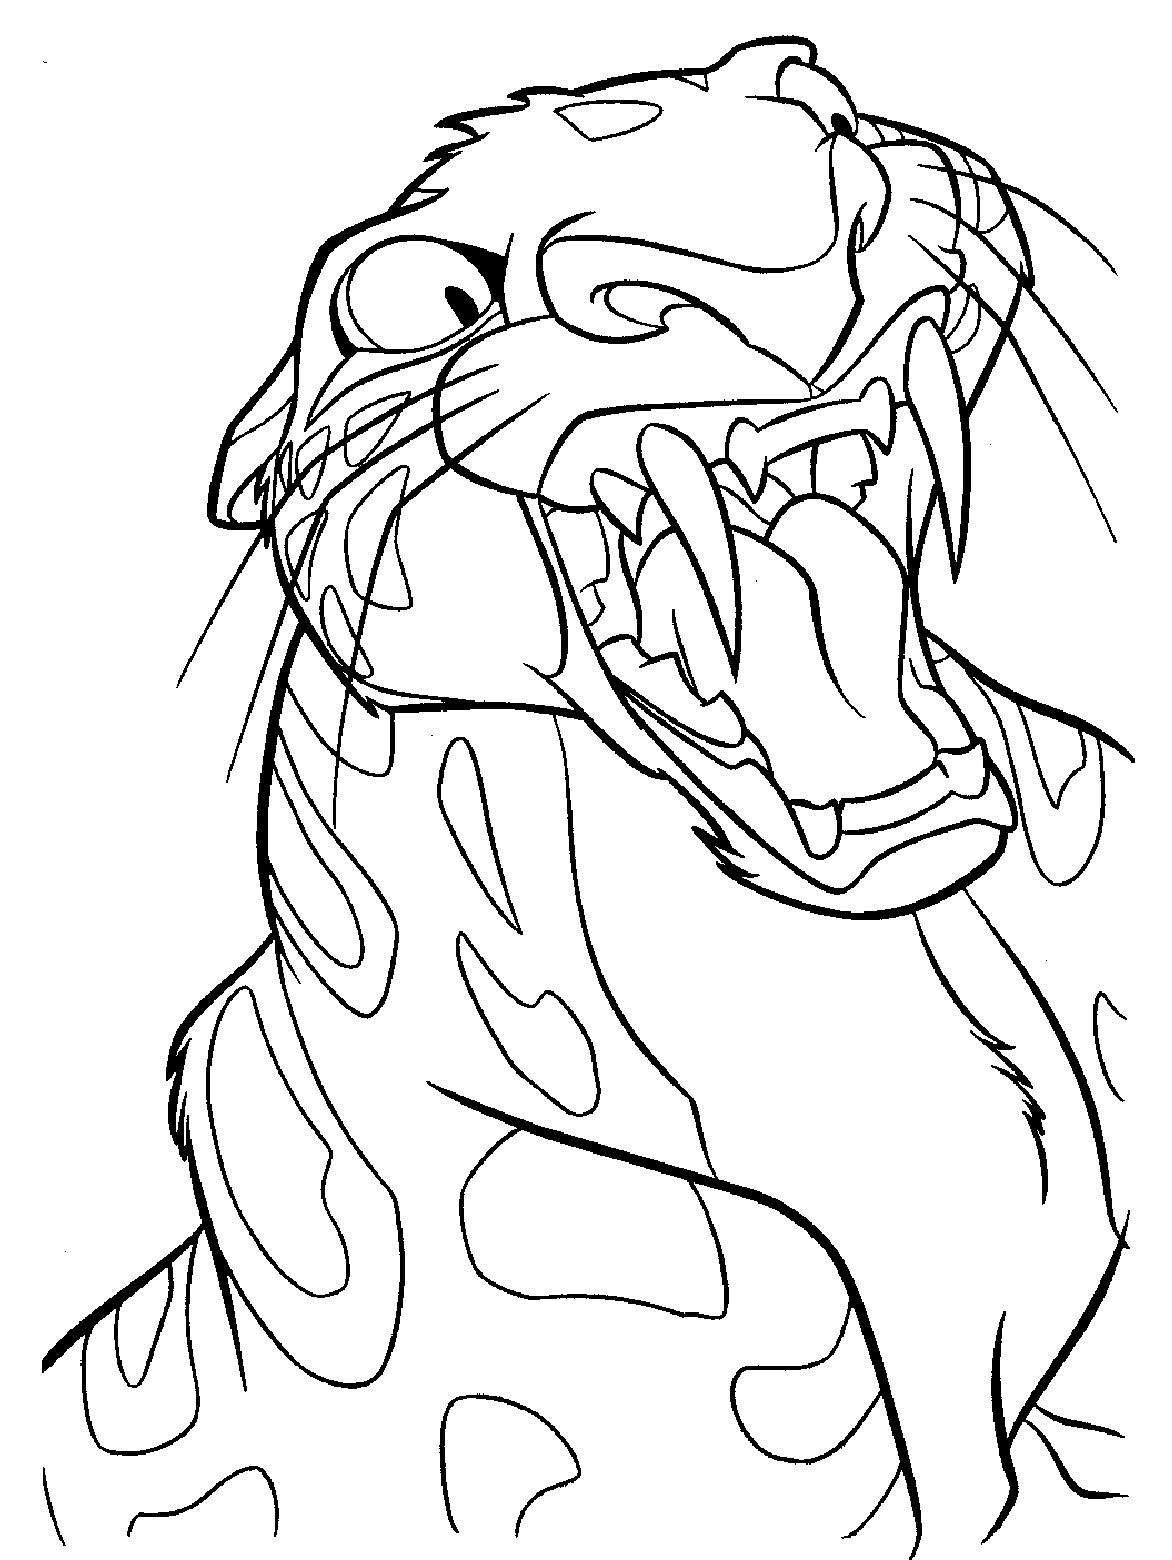 Leopard Sabor From Tarzan Coloring Pages